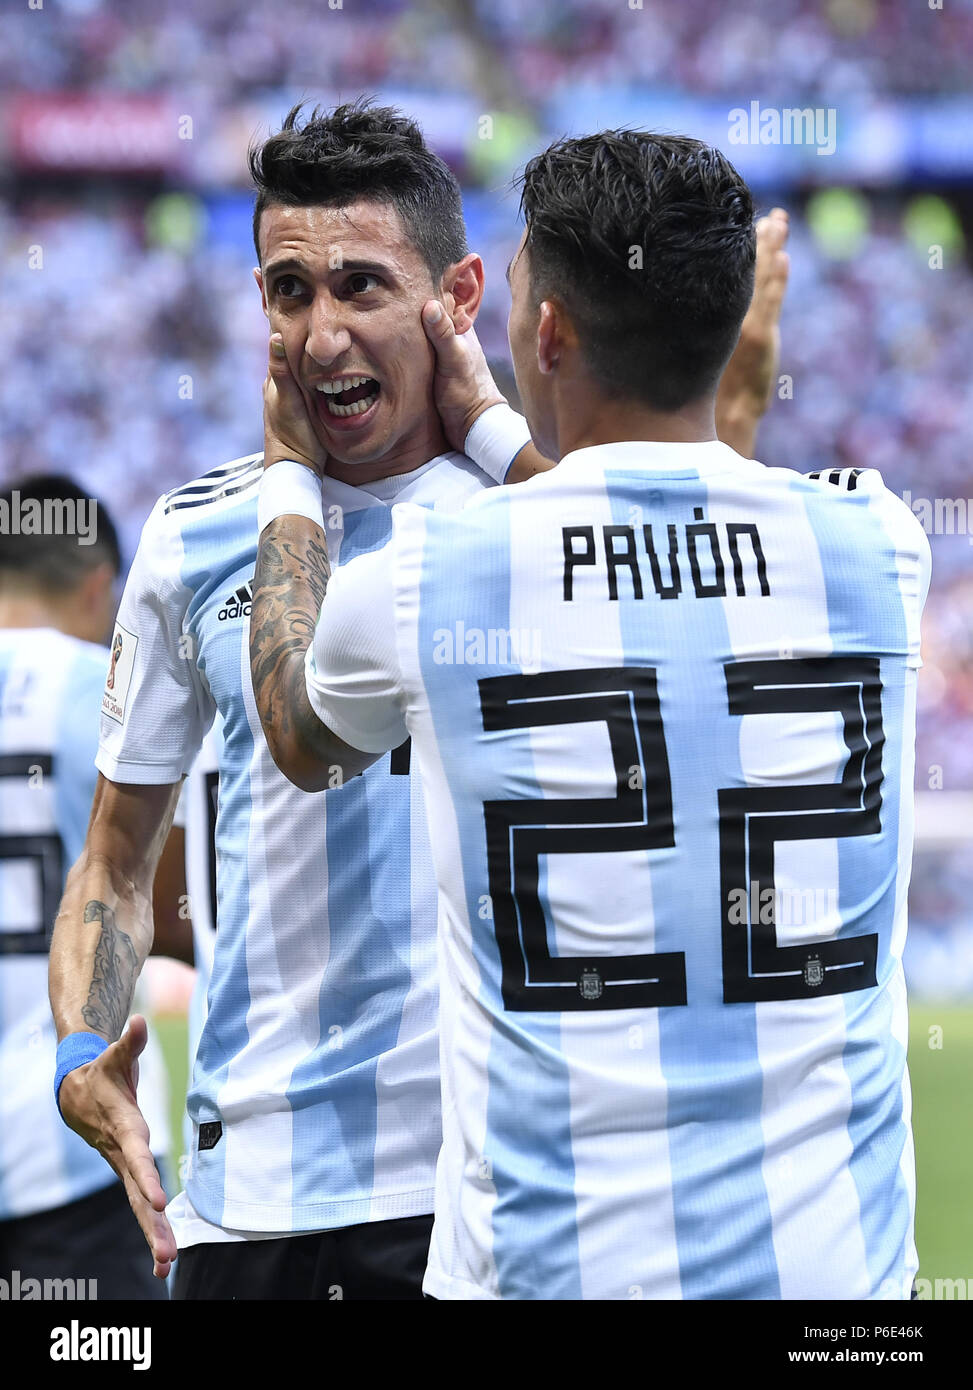 (180630) -- KAZAN, June 30, 2018 (Xinhua) -- Angel Di Maria (L) of Argentina celebrates scoring with Cristian Pavon during the 2018 FIFA World Cup round of 16 match between France and Argentina in Kazan, Russia, on June 30, 2018. (Xinhua/Chen Yichen) Stock Photo